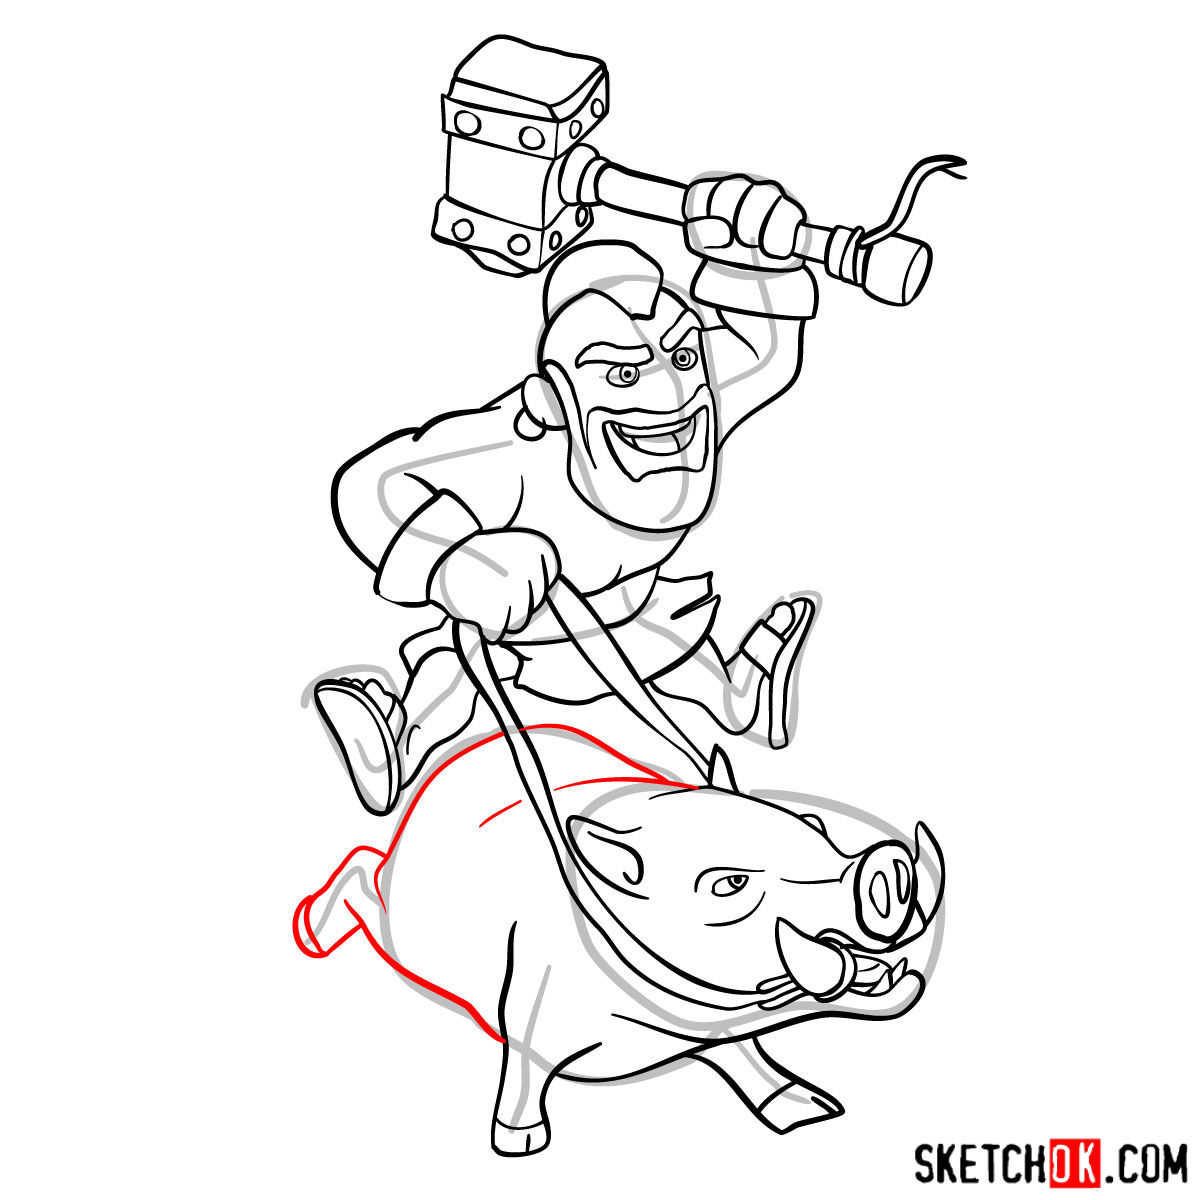 How to draw Hog Rider from Clash of Clans - step 14